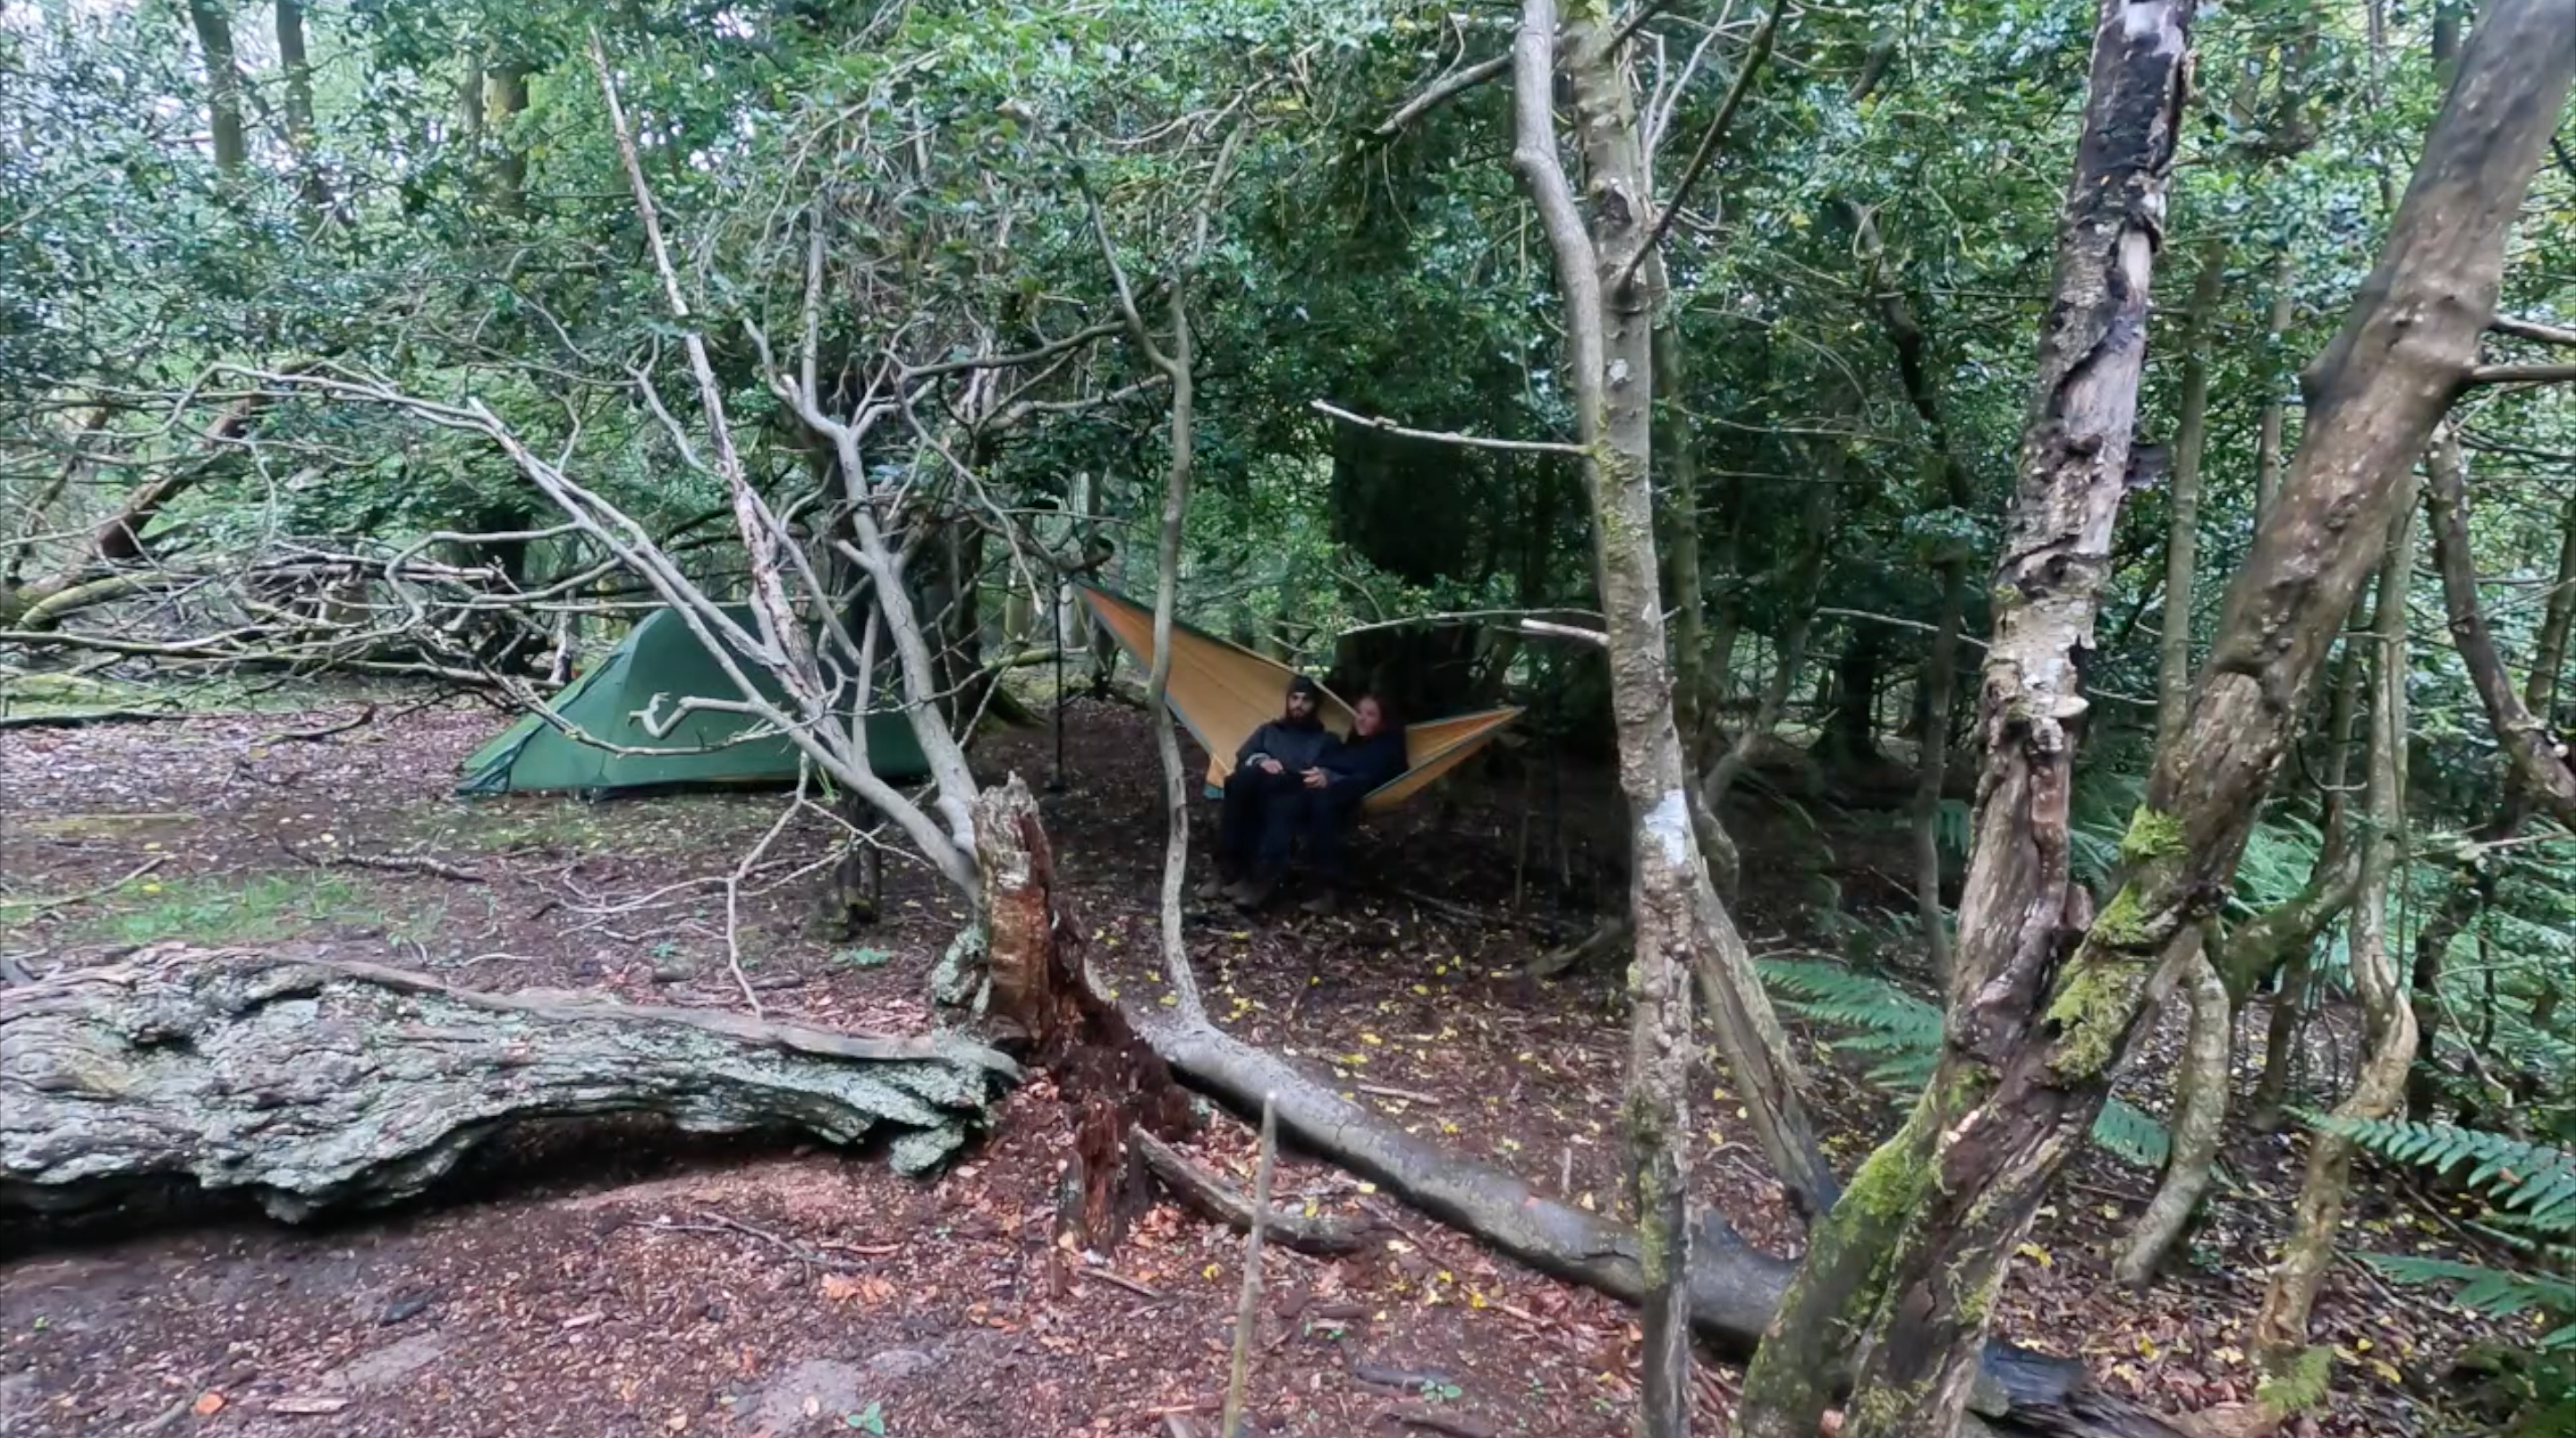 Video | Rainy Weekend Wild Camping In A British Forest